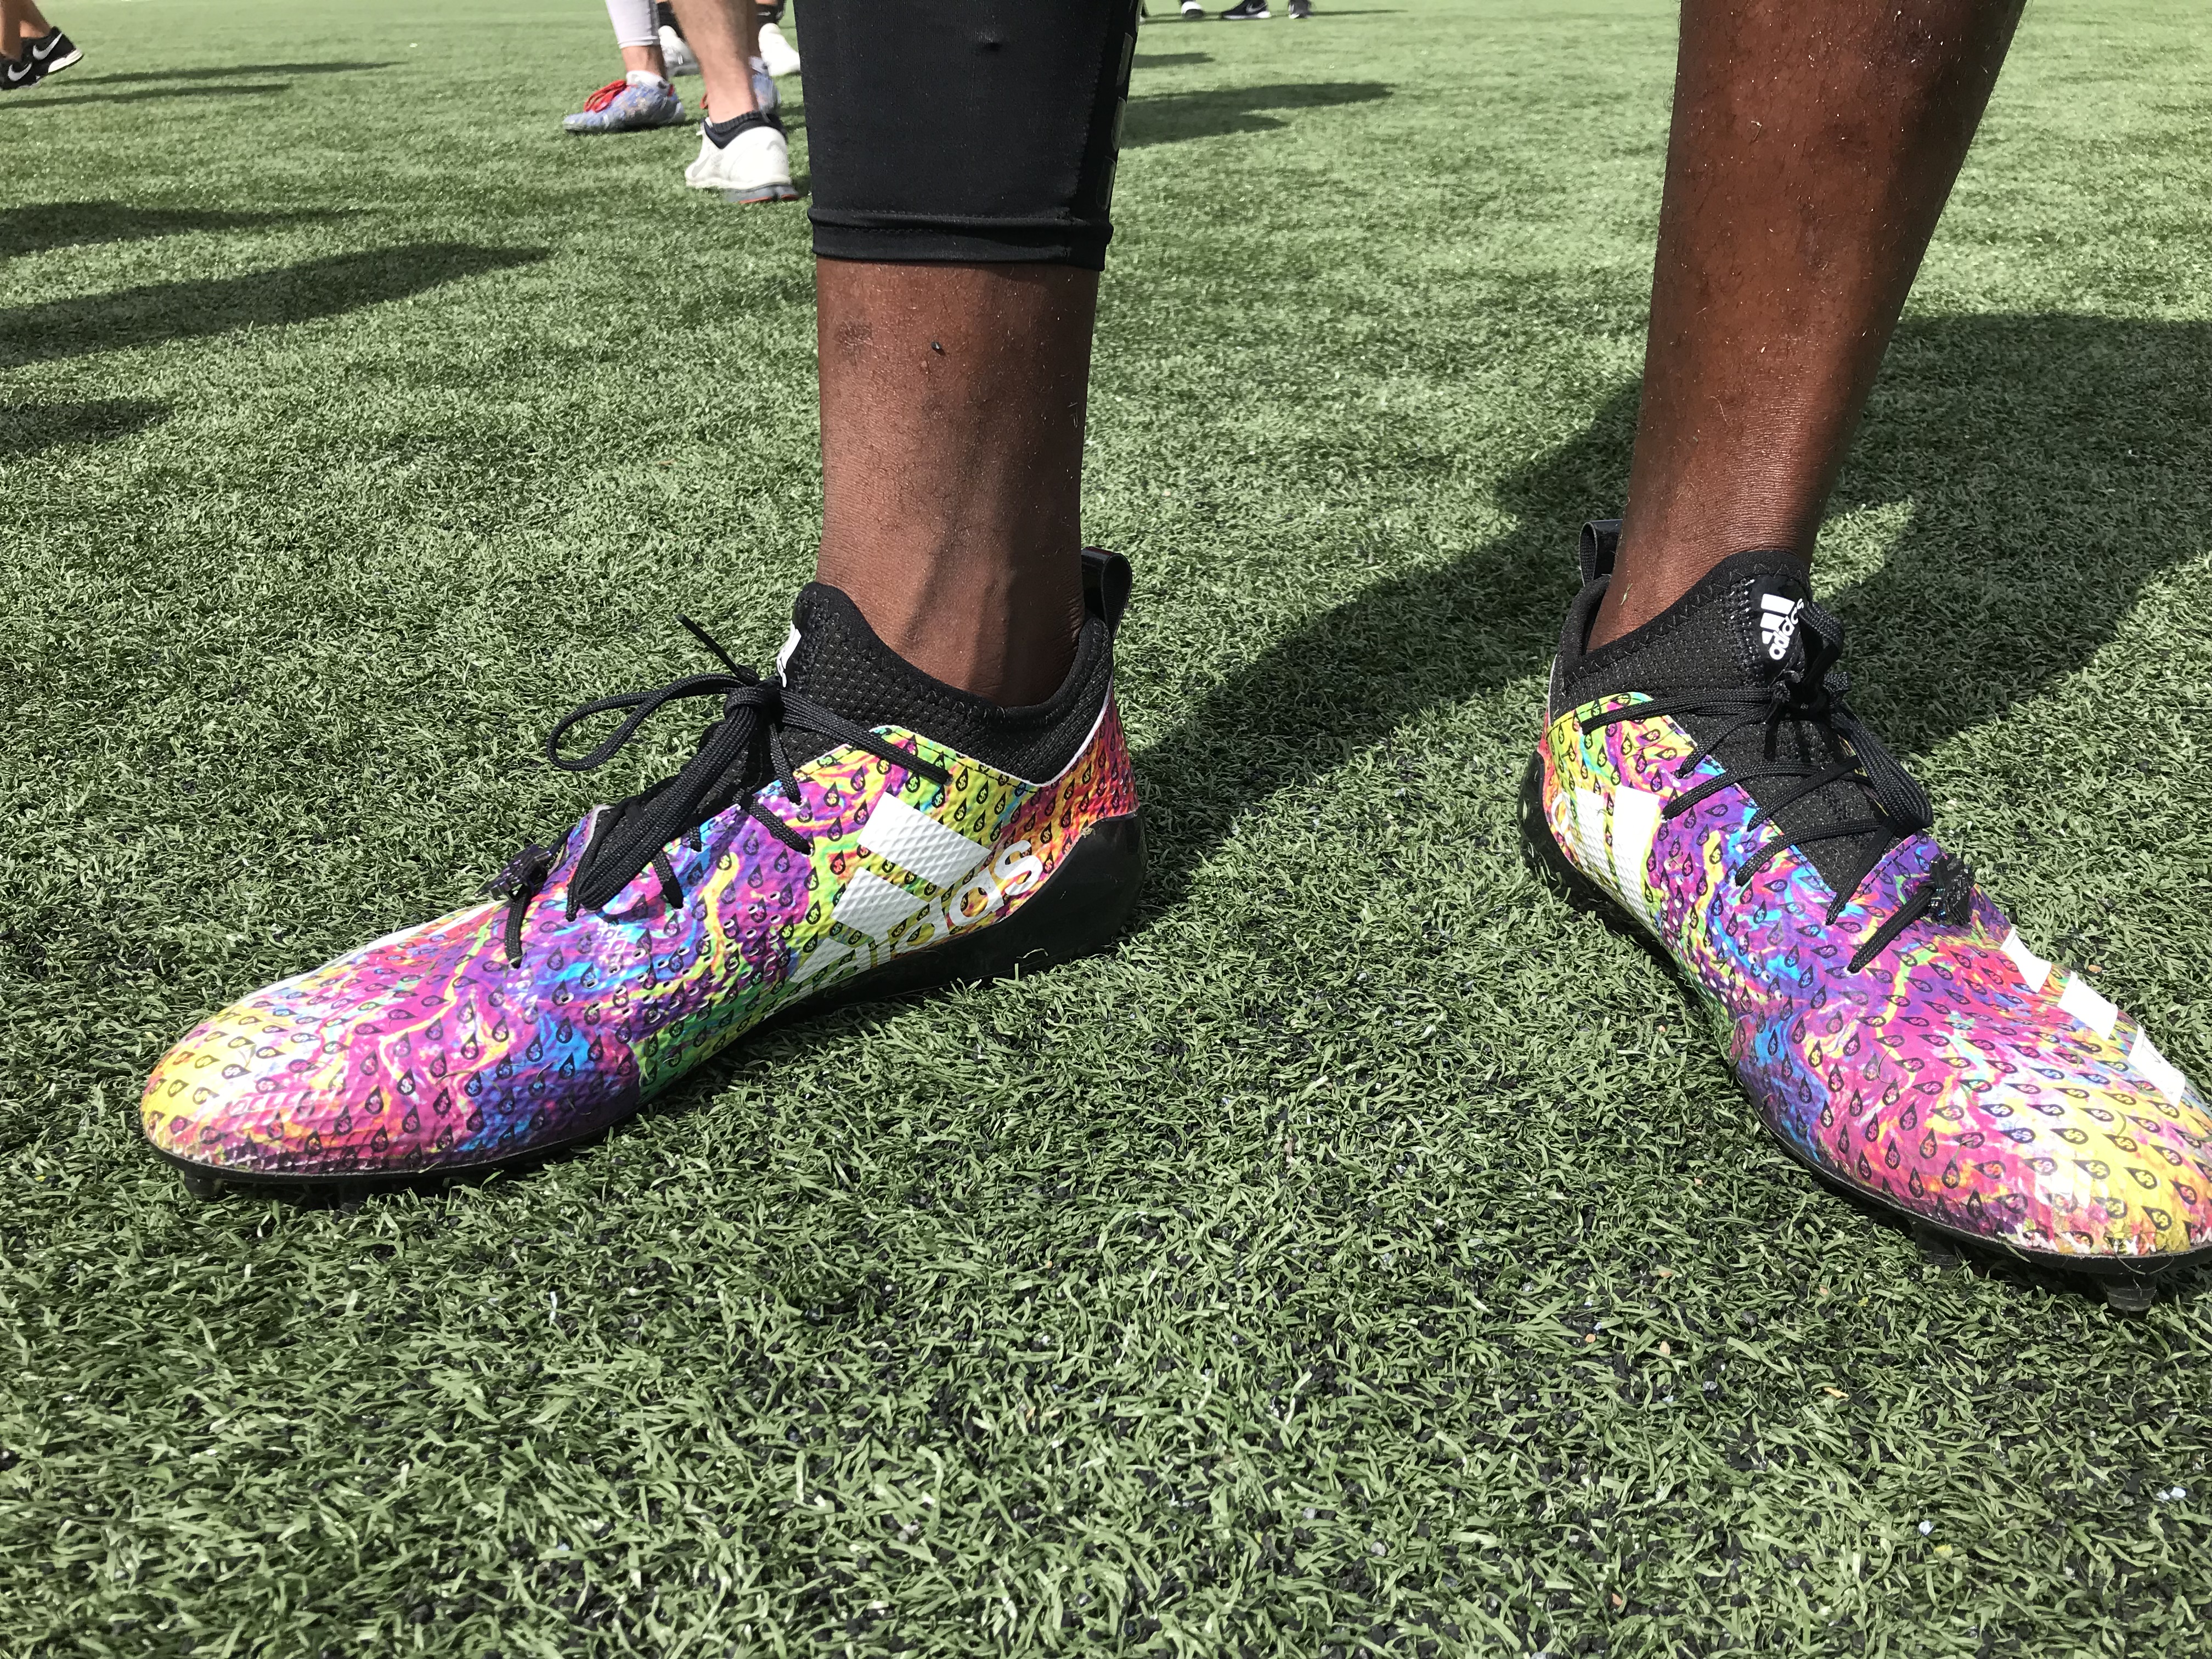 wide scream prince Jerseys, rainbow cleats and more: A look at the Adidas 7-on-7 tournament  gear